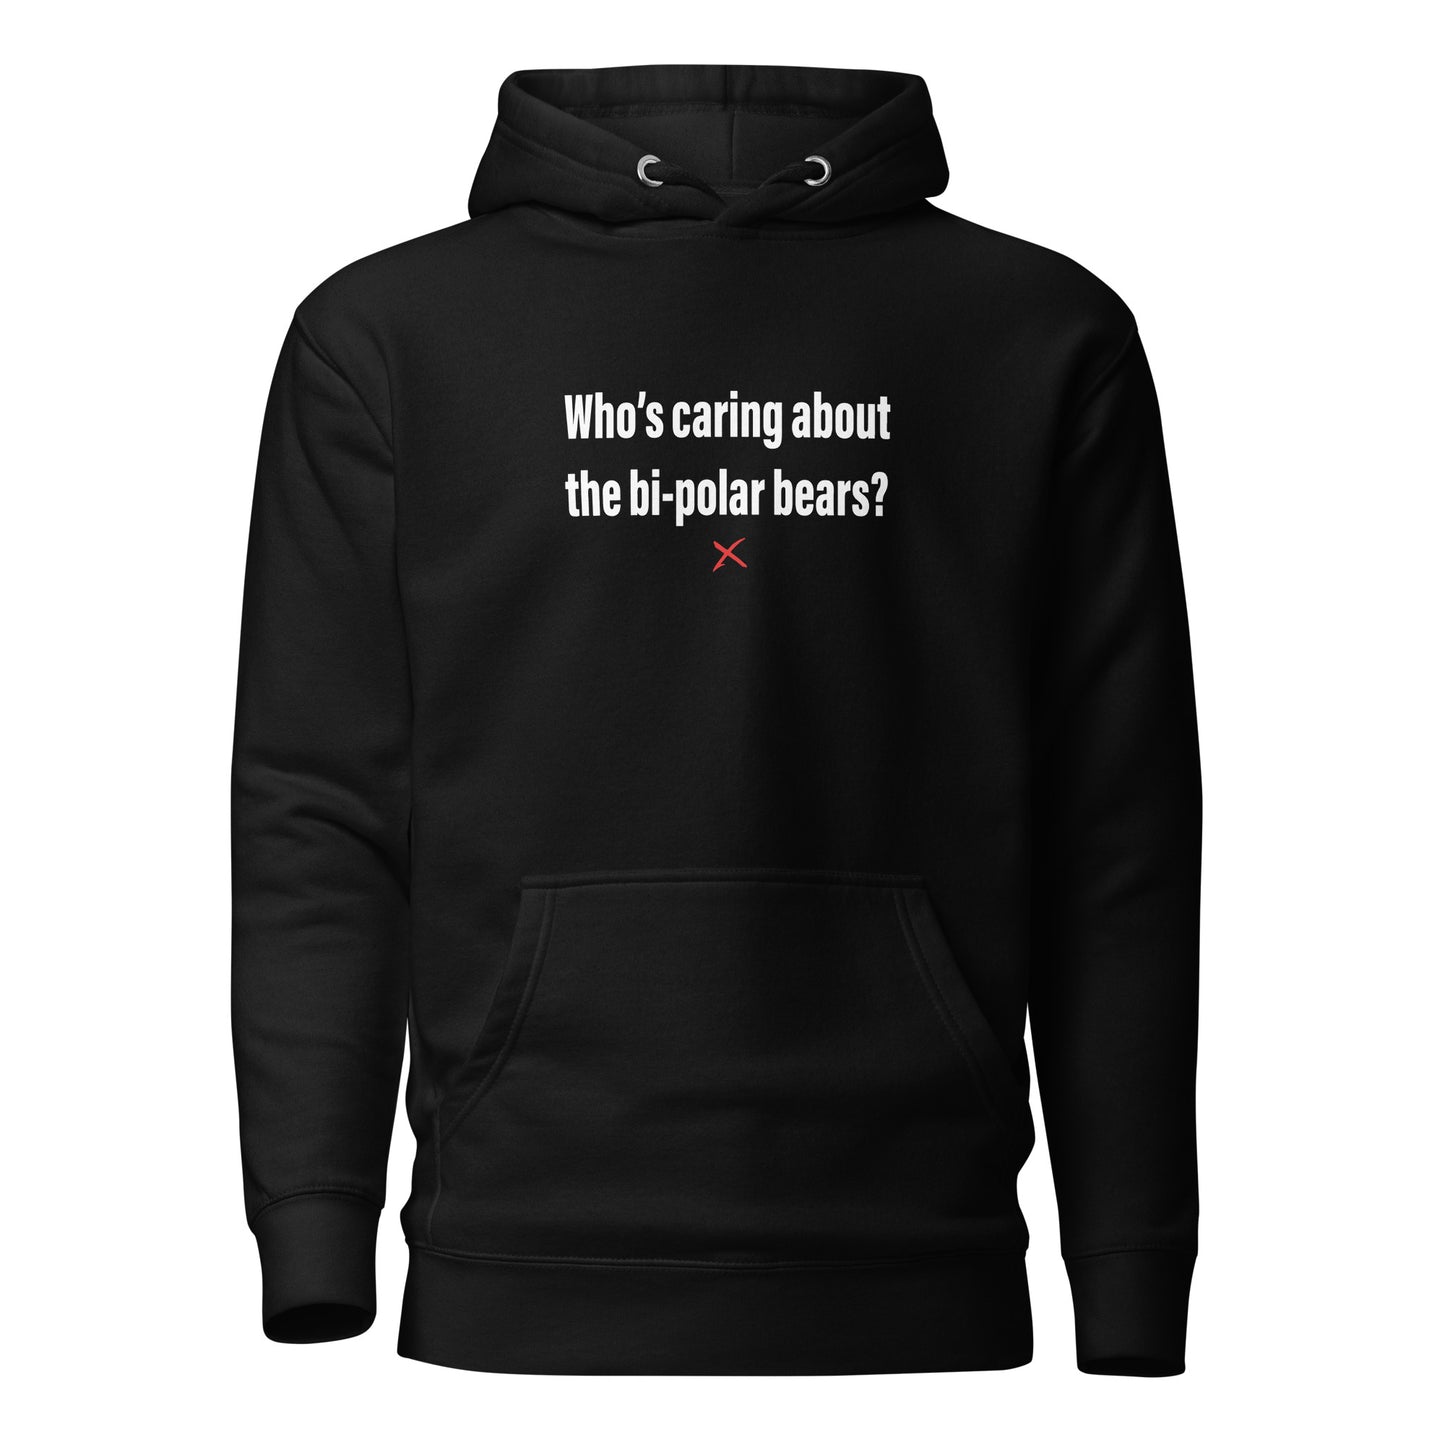 Who's caring about the bi-polar bears? - Hoodie